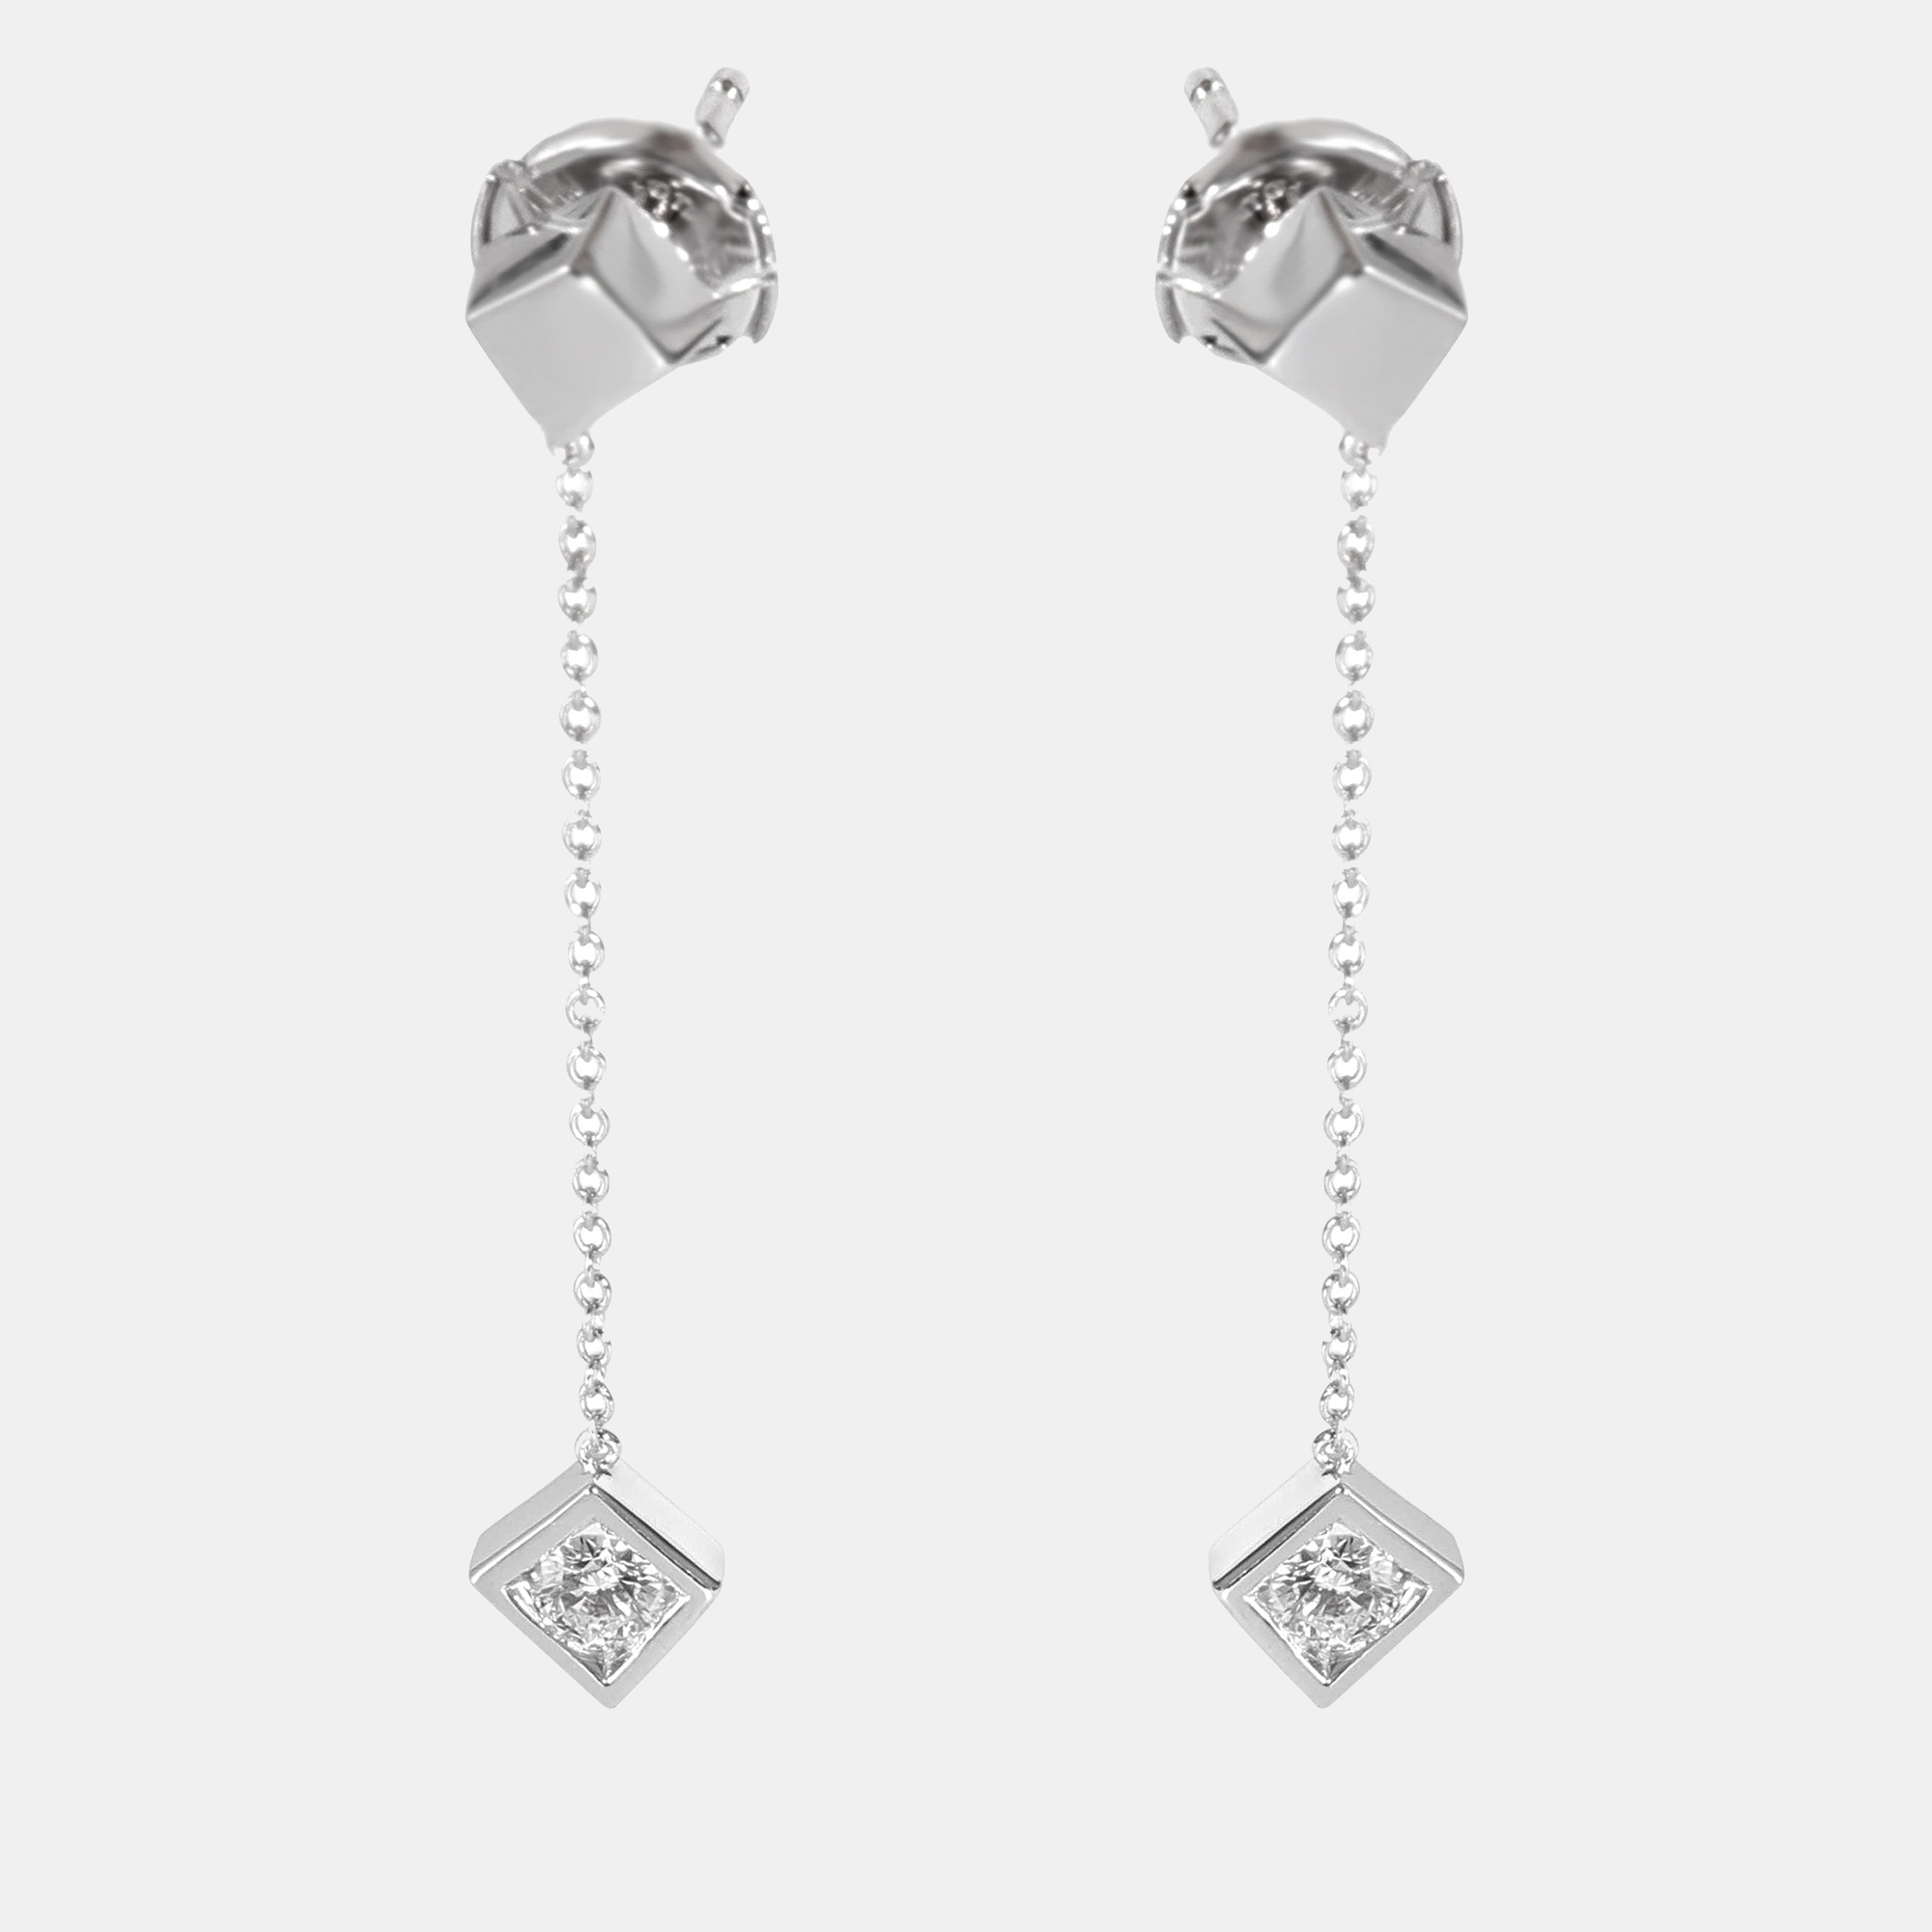 Pre-owned Tiffany & Co Frank Gehry Torque Cube Drop Earring In 18k White Gold 0.40 Ctw